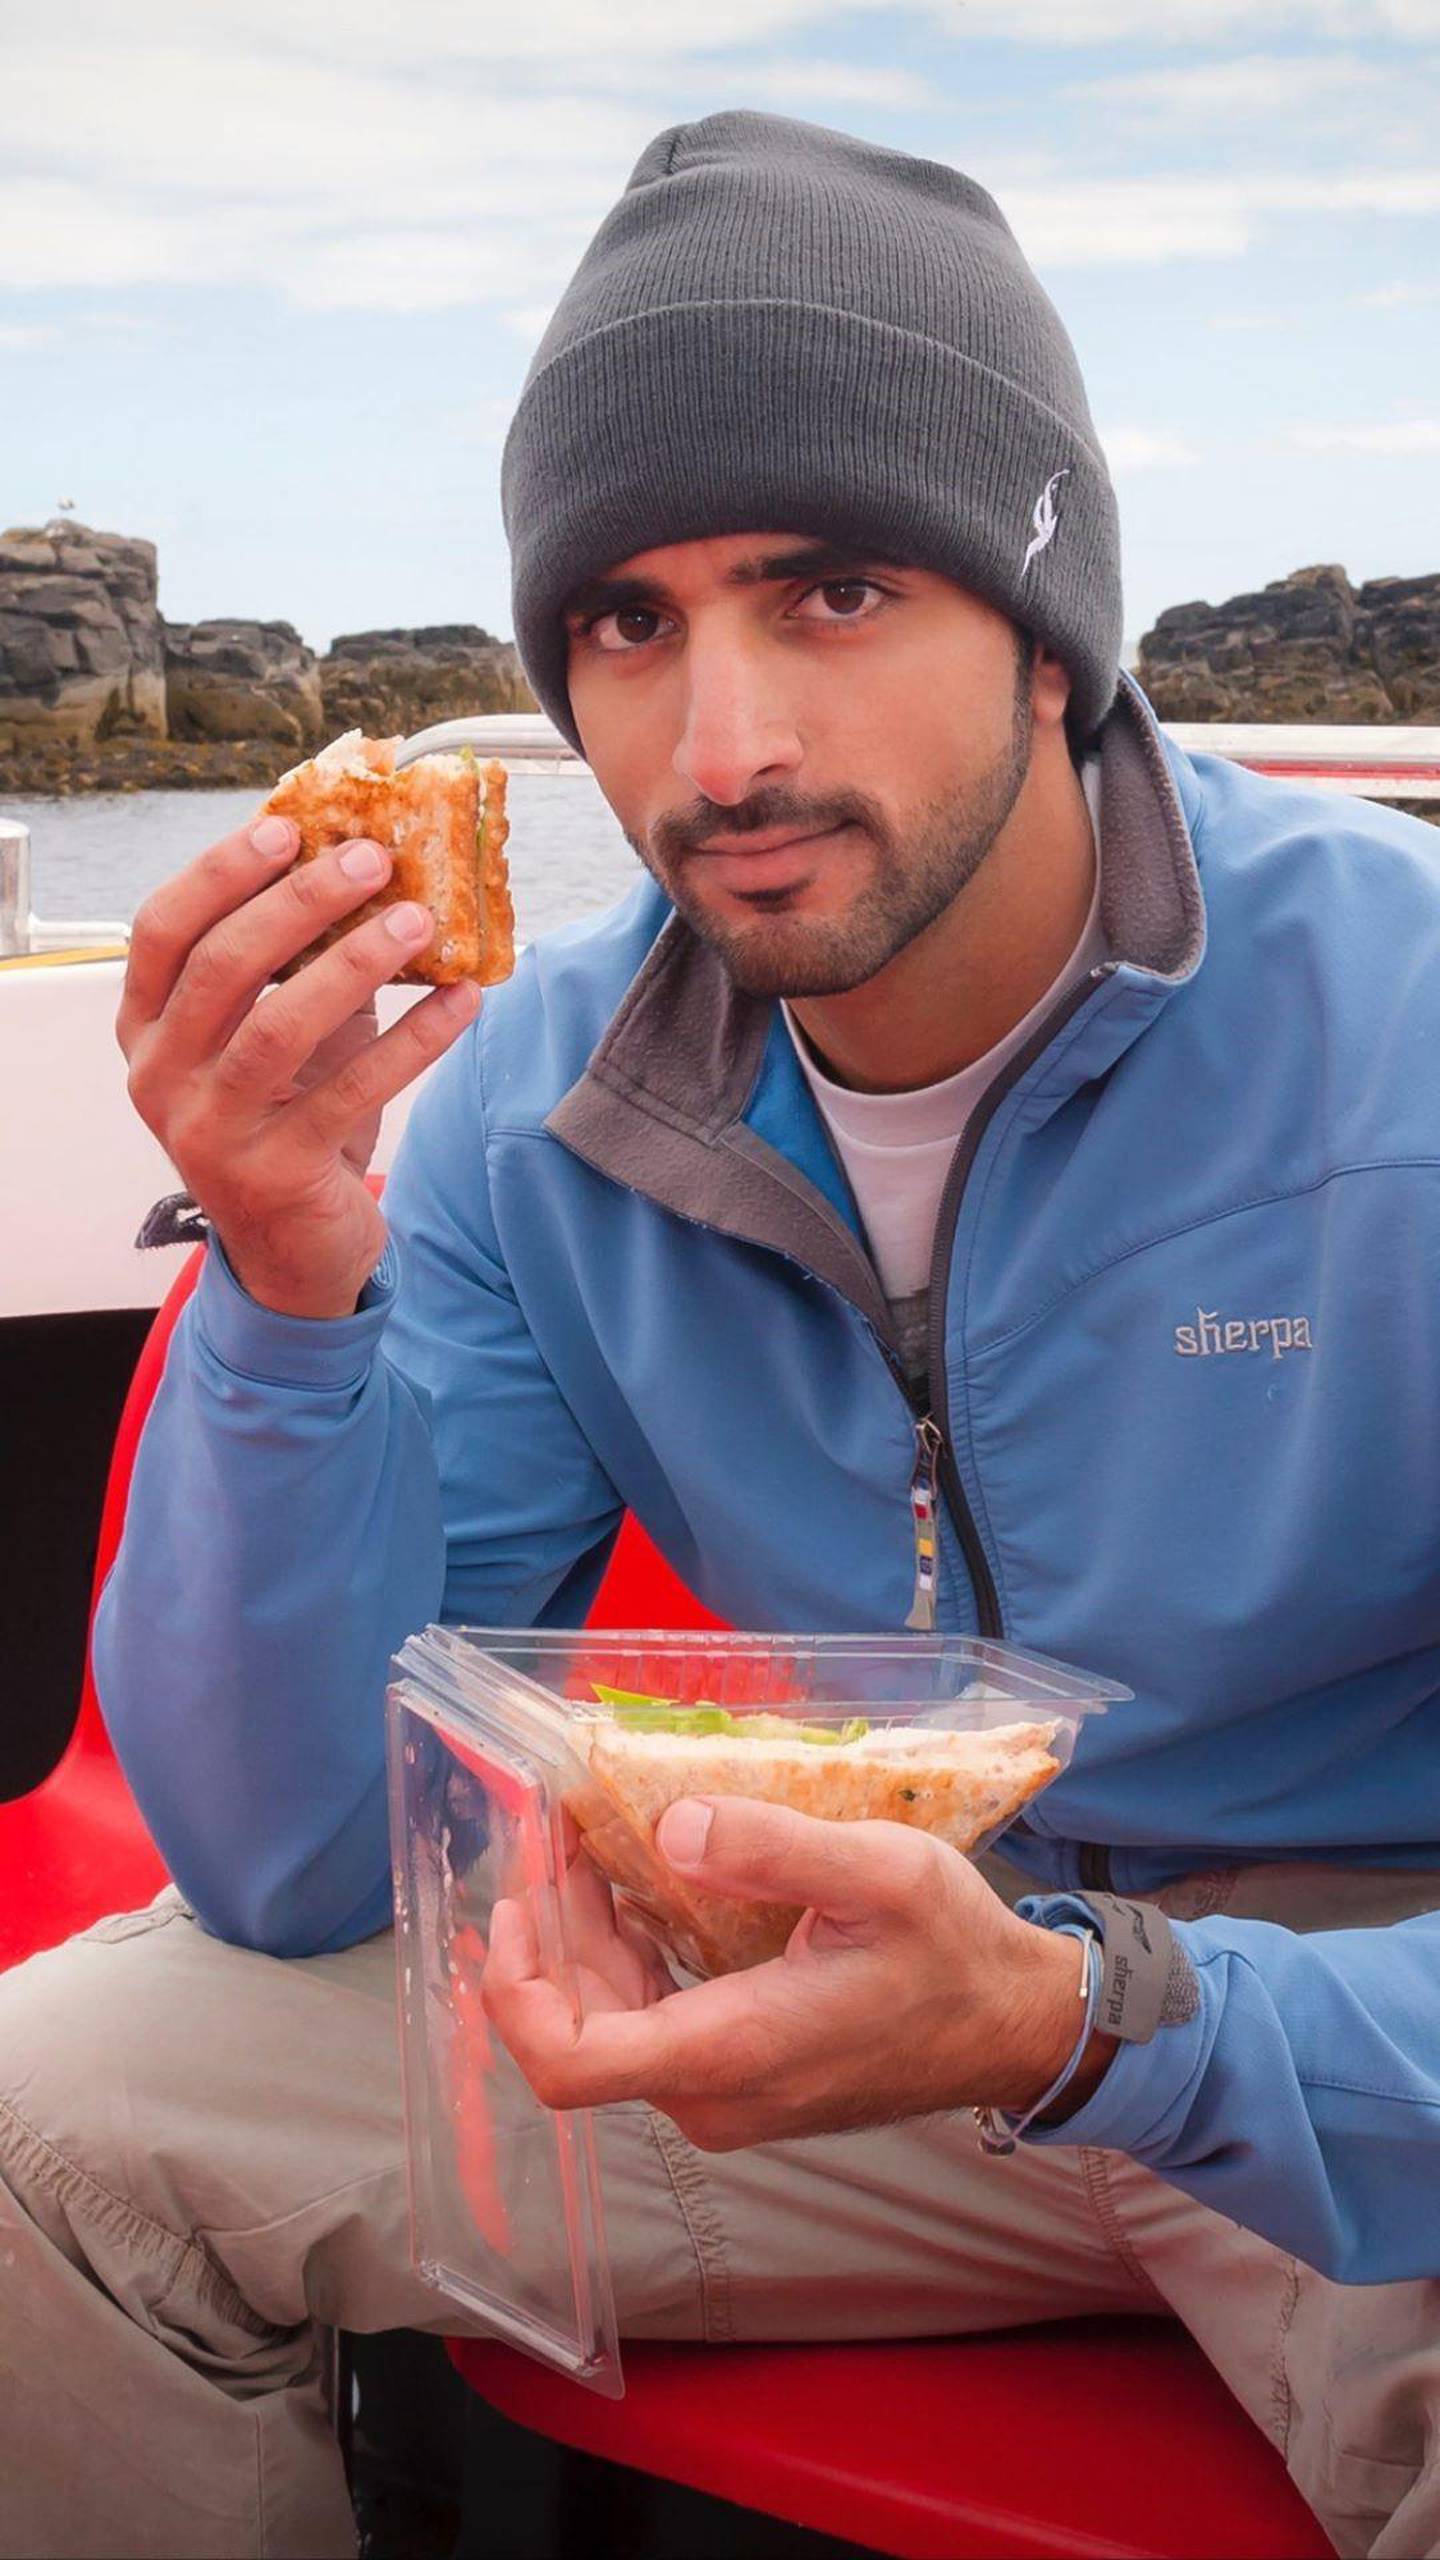 Sheikh Hamdan tucks into a pre-packed sandwich on his trip to the Isle of May. Courtesy Instagram / faz3